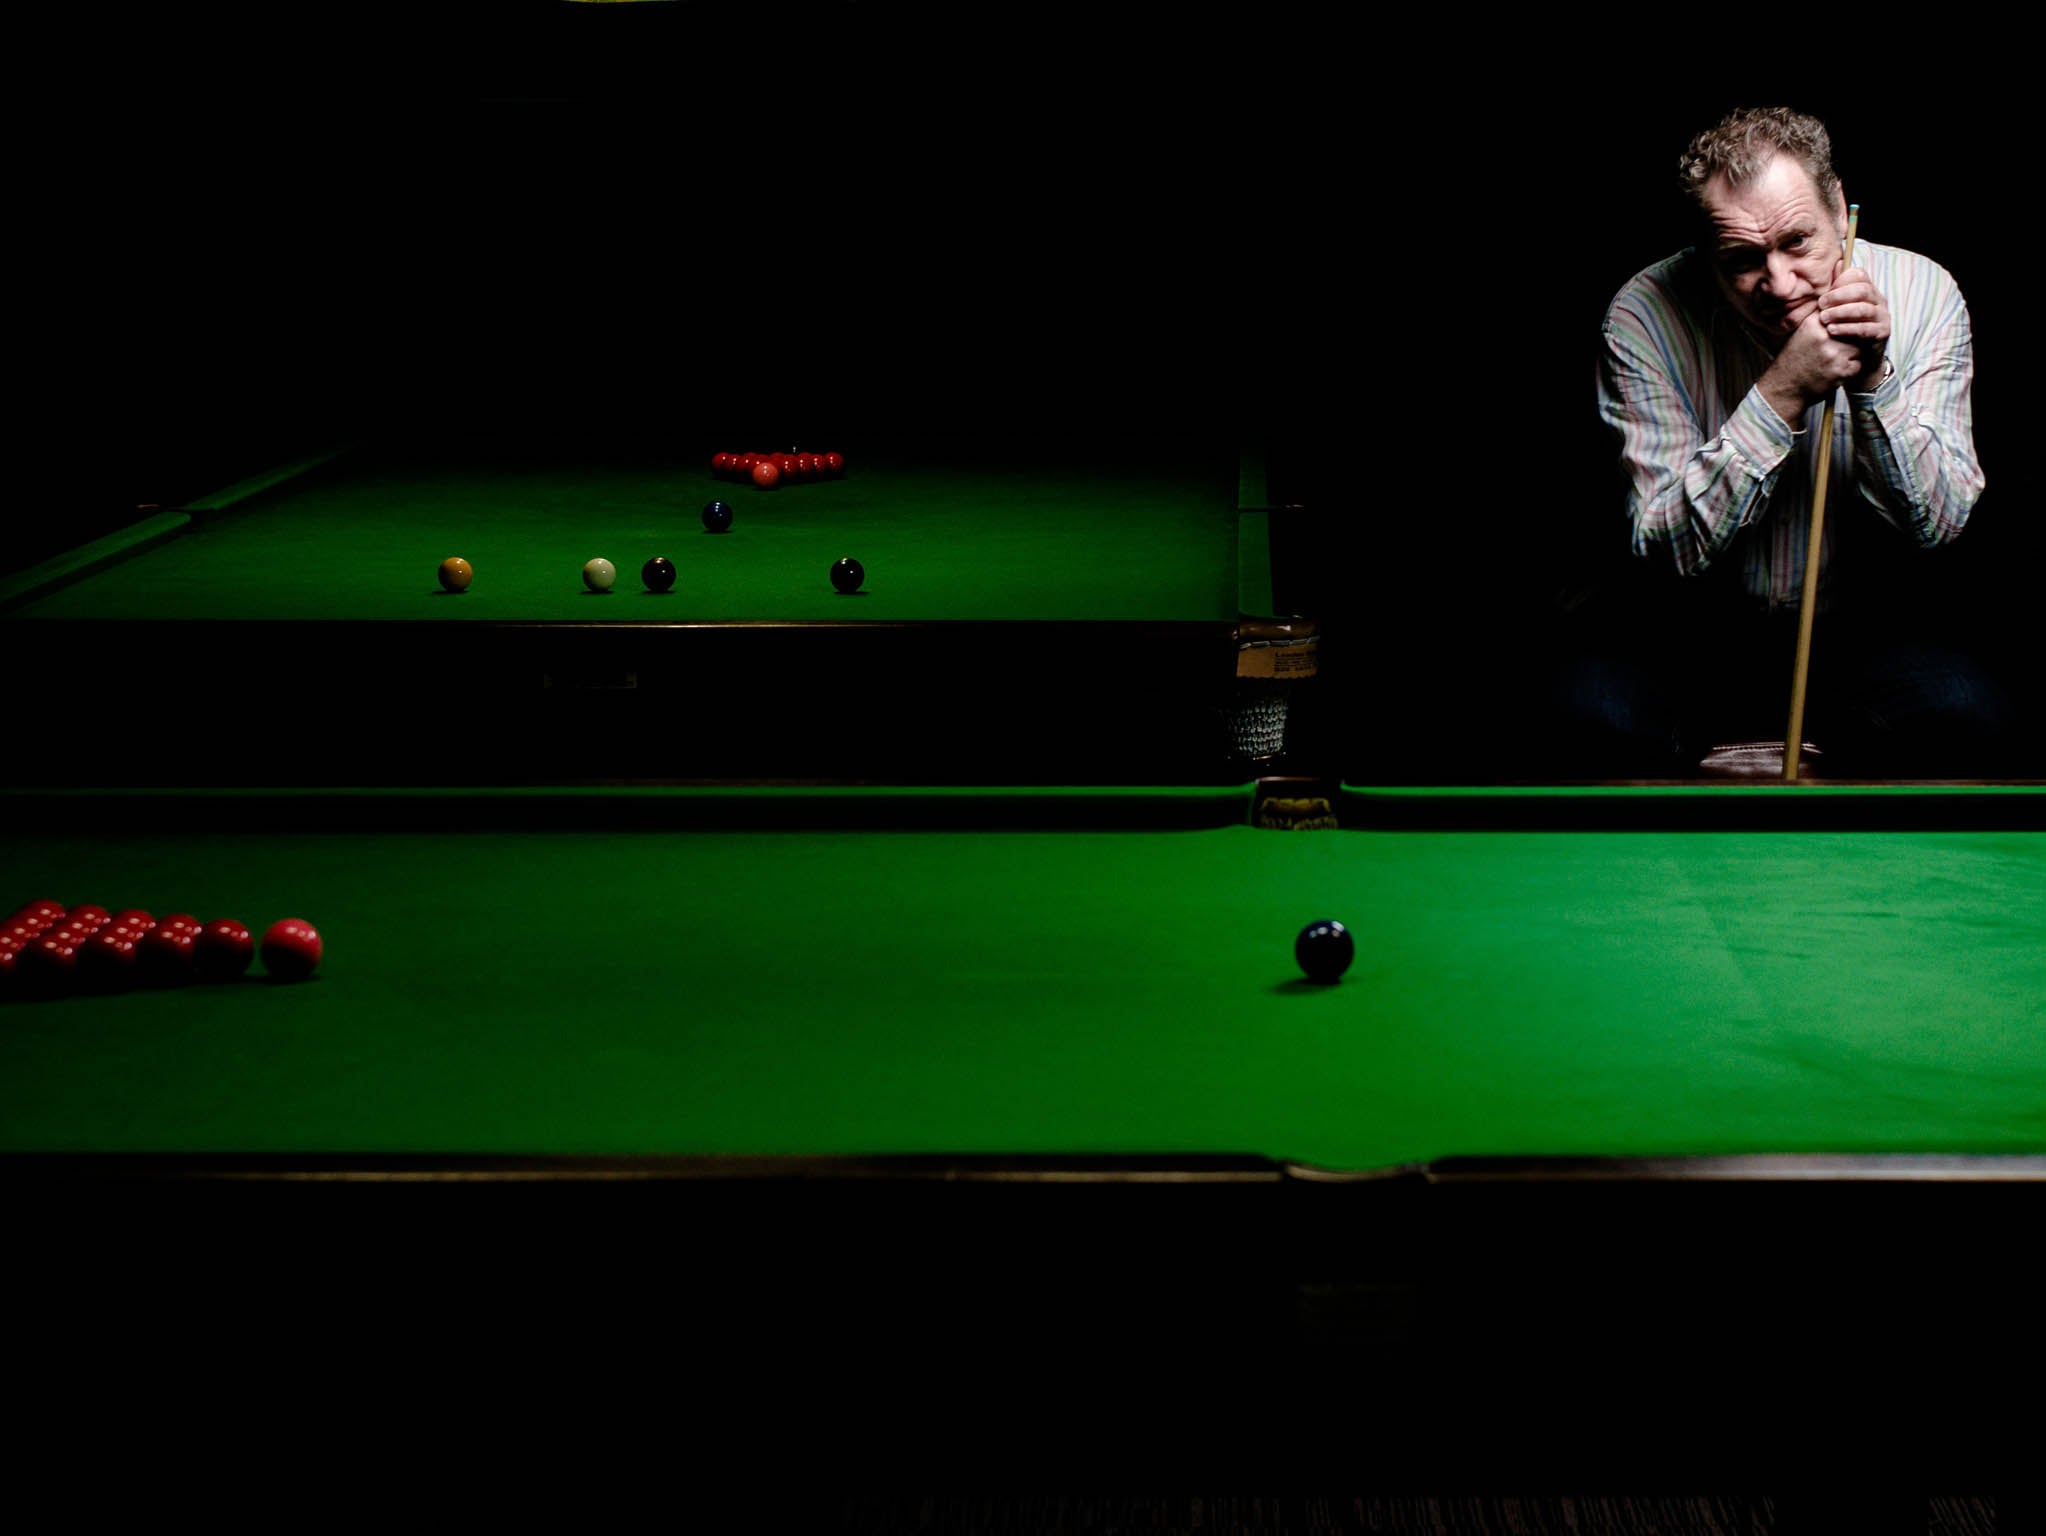 The Nap features a snooker game played live on stage